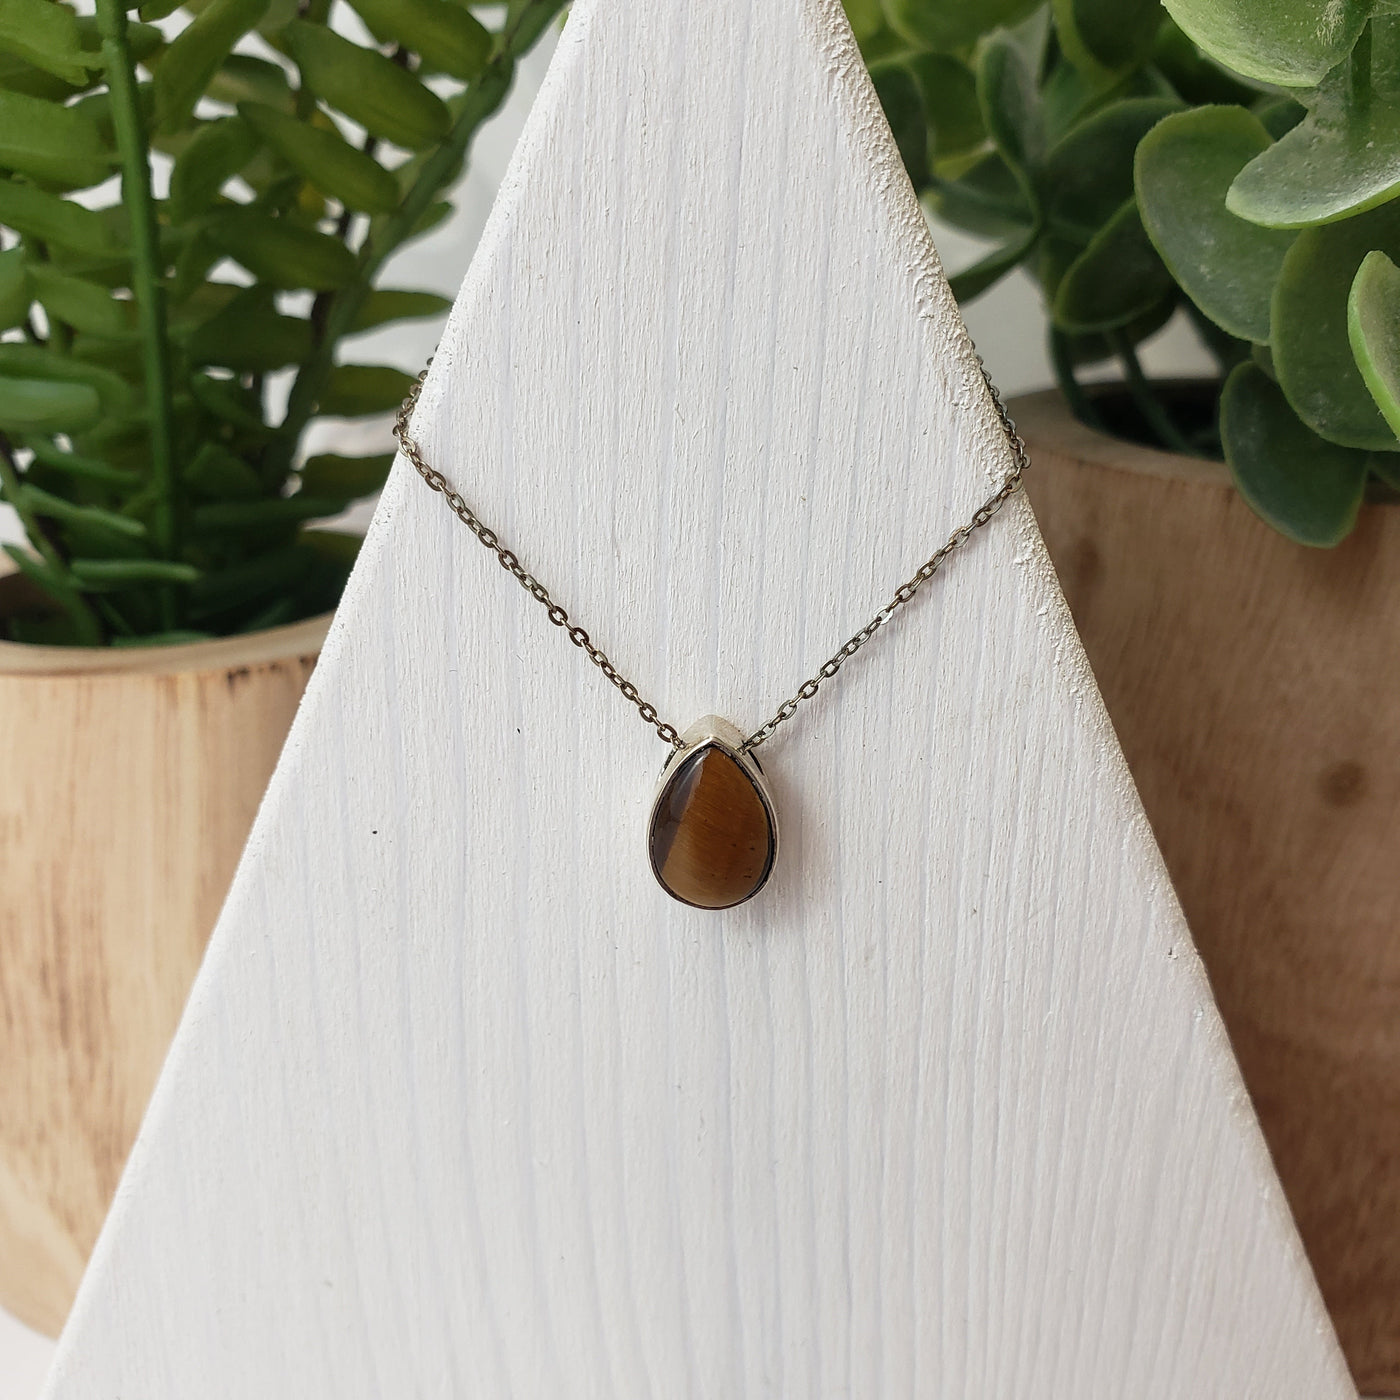 Tiger's Eye Necklace with Sliding Pendant